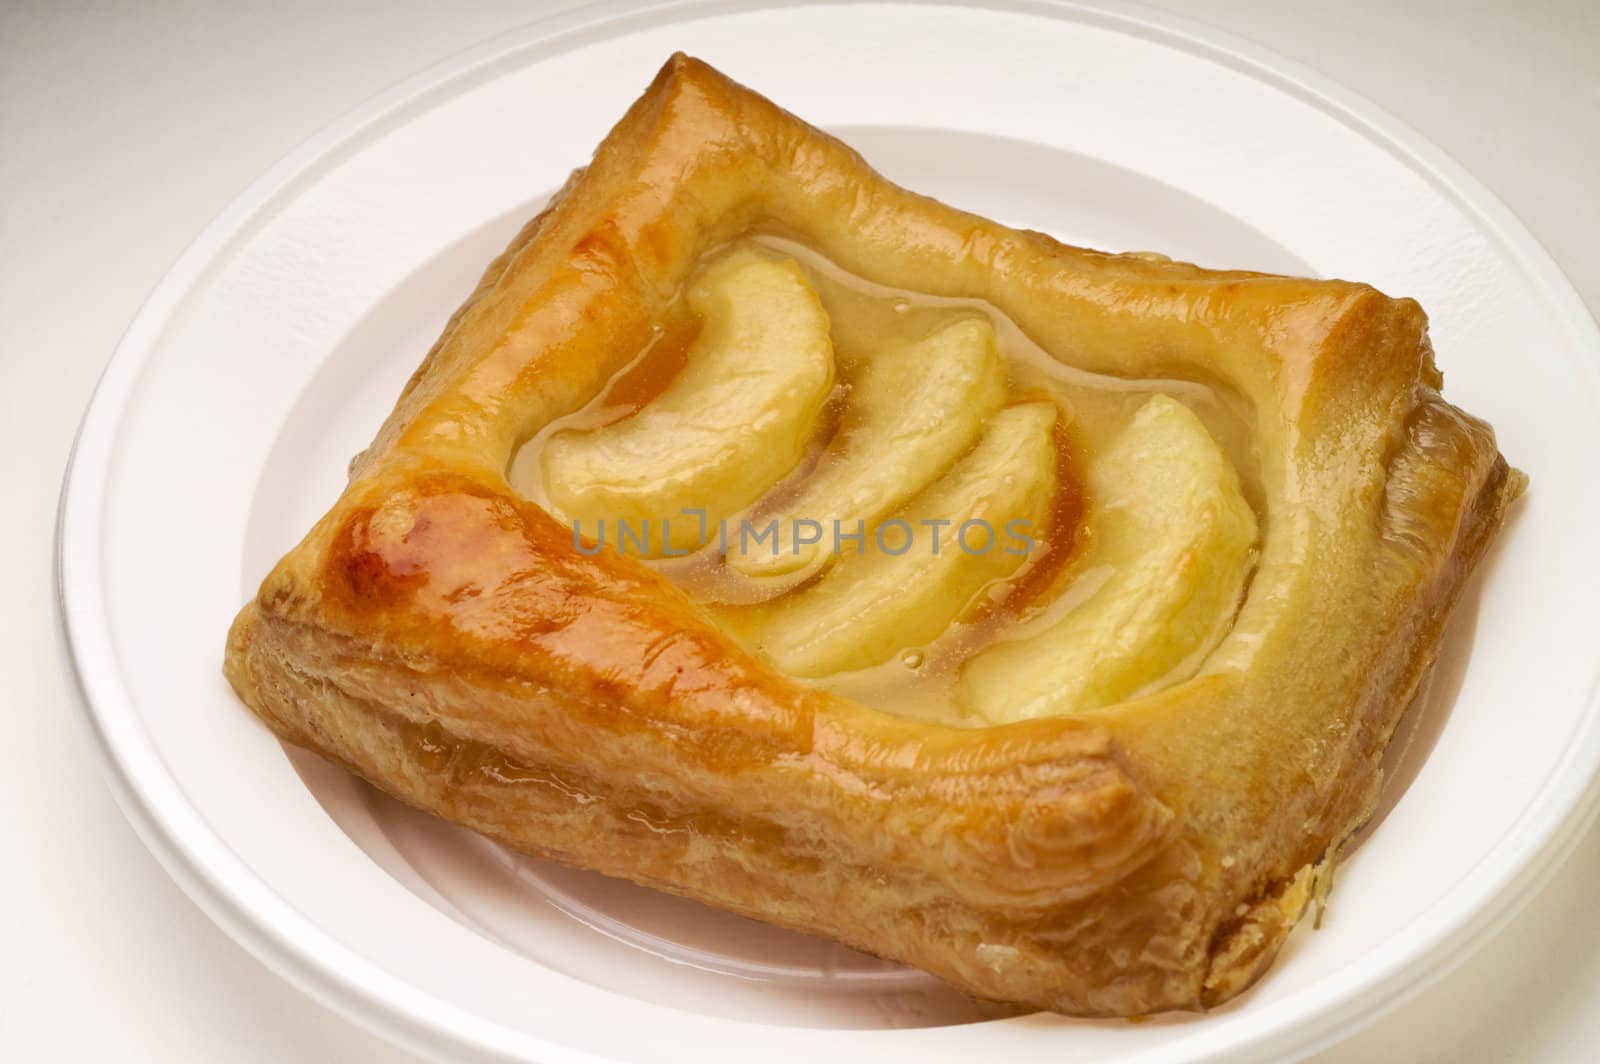 Apple puff pastry dessert with clipping path by Laborer